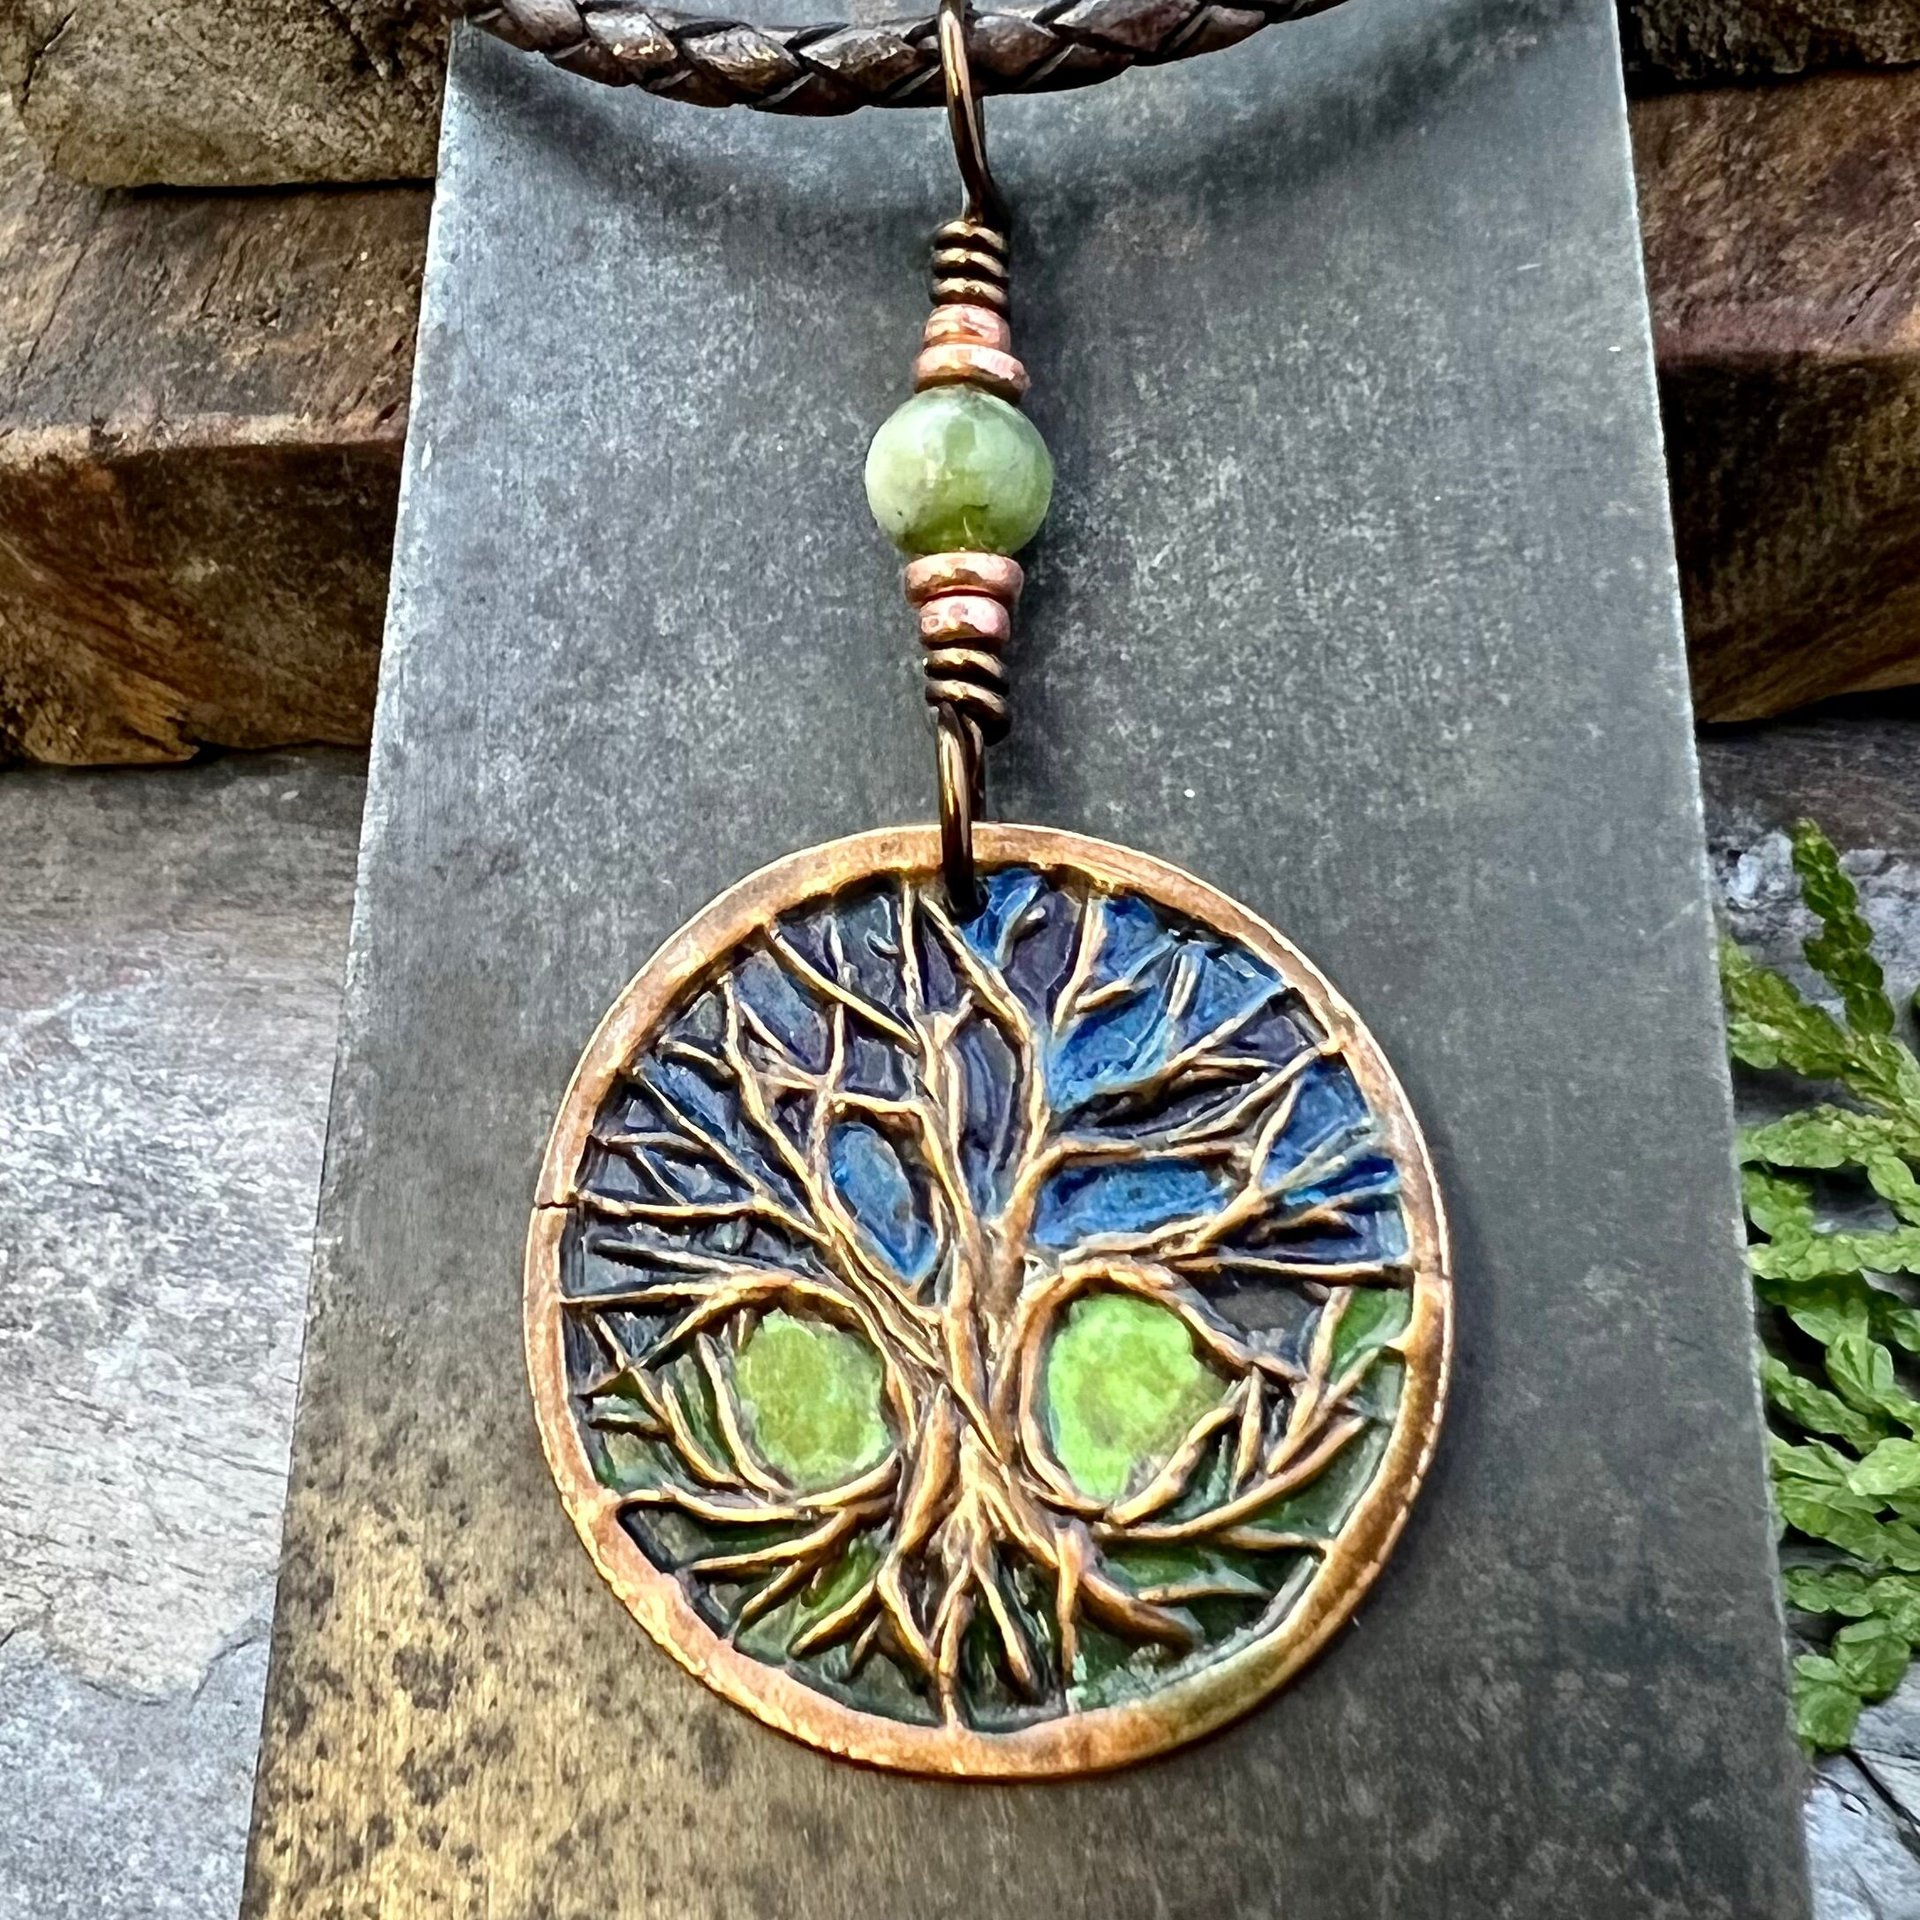 Celtic Tree of Life, Round Copper Pendant, Colorful Patina, Connemara Marble, Irish Celtic Spirals, Celtic Witch Goddess, Earthy Art Jewelry